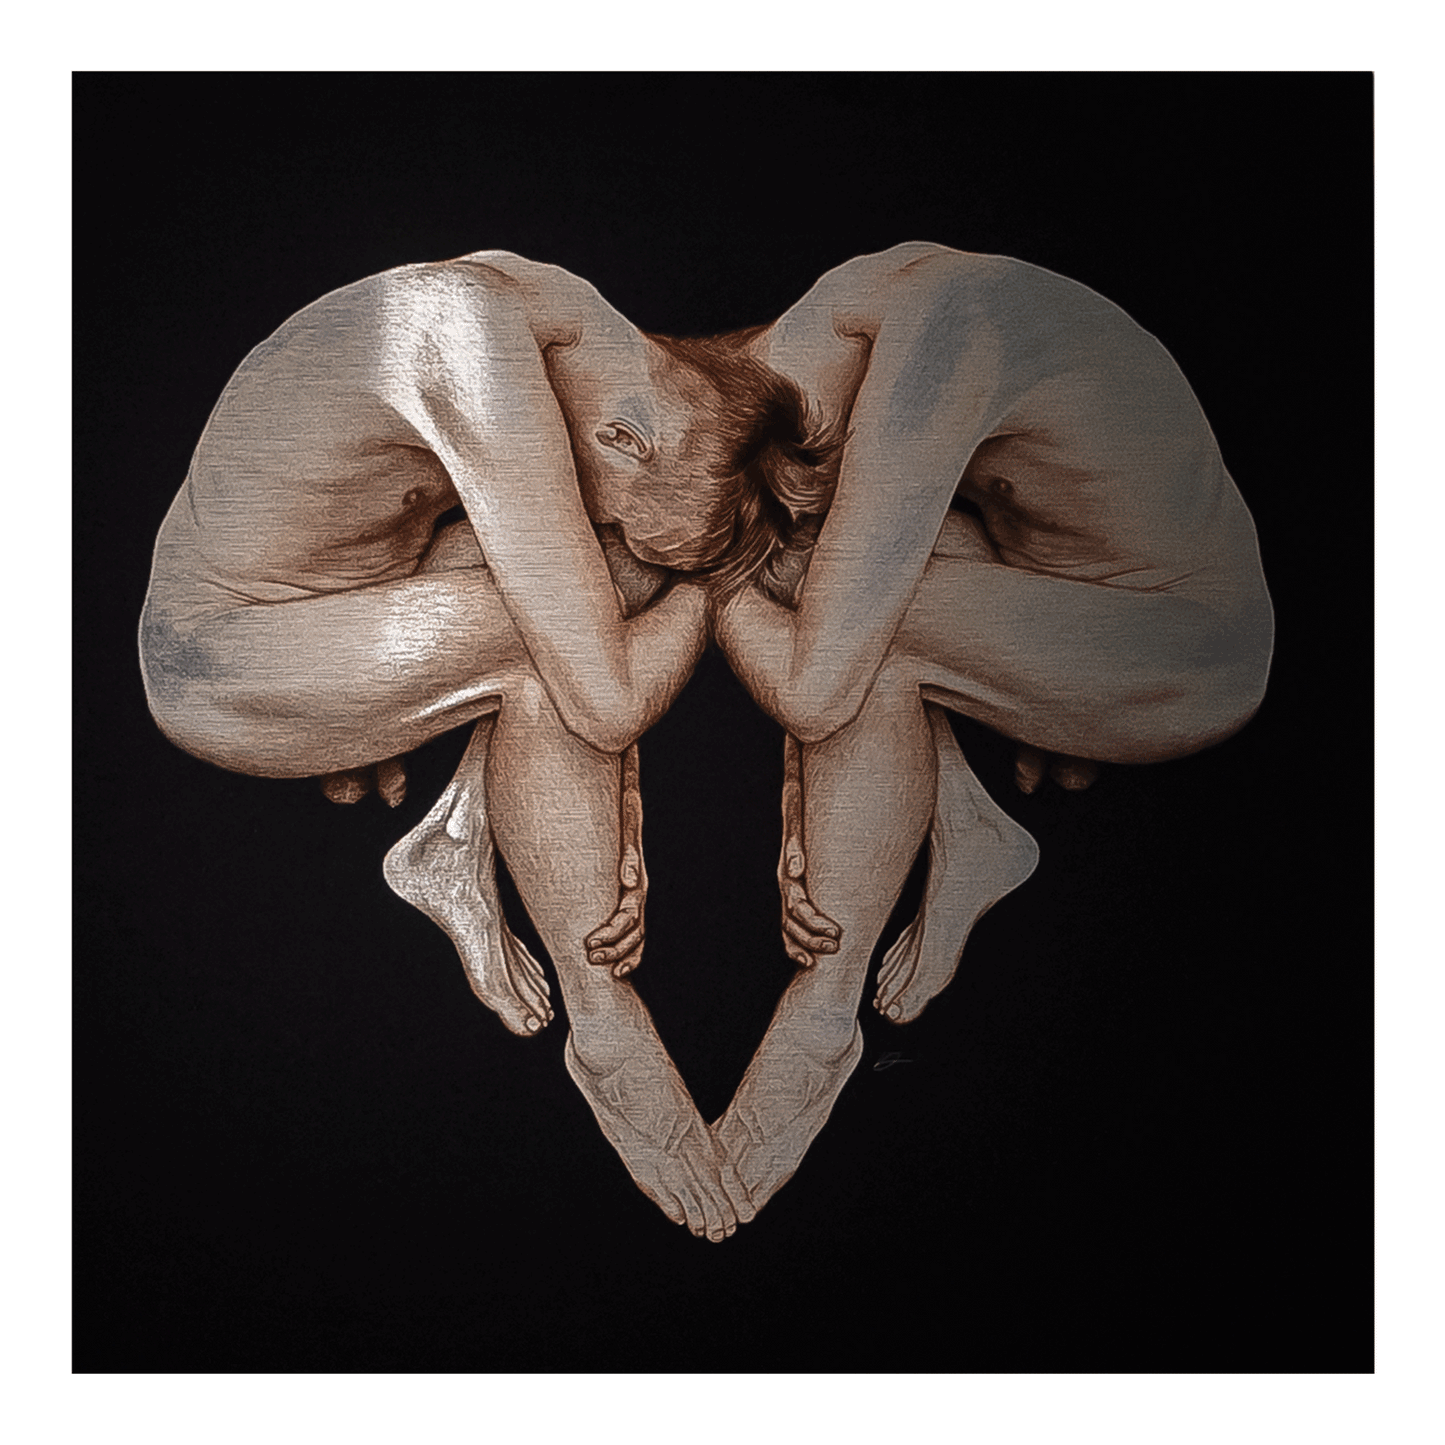 METAL Naked Heart - LIMITED EDITION METAL PRINT (1 of 3) - Danny Branscombe